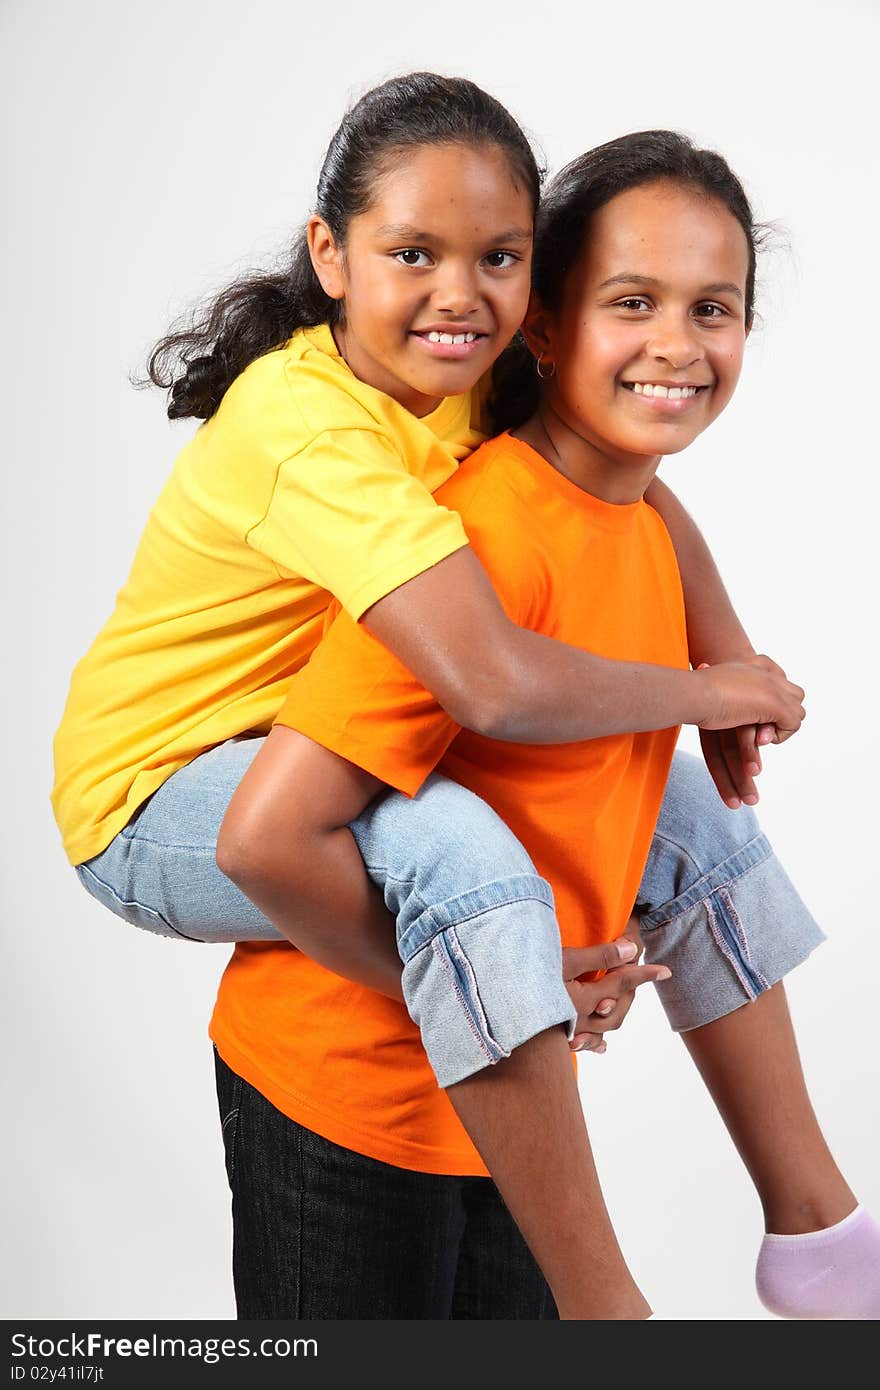 Fun piggy back ride from two happy young school girl friends together in studio - . Fun piggy back ride from two happy young school girl friends together in studio -